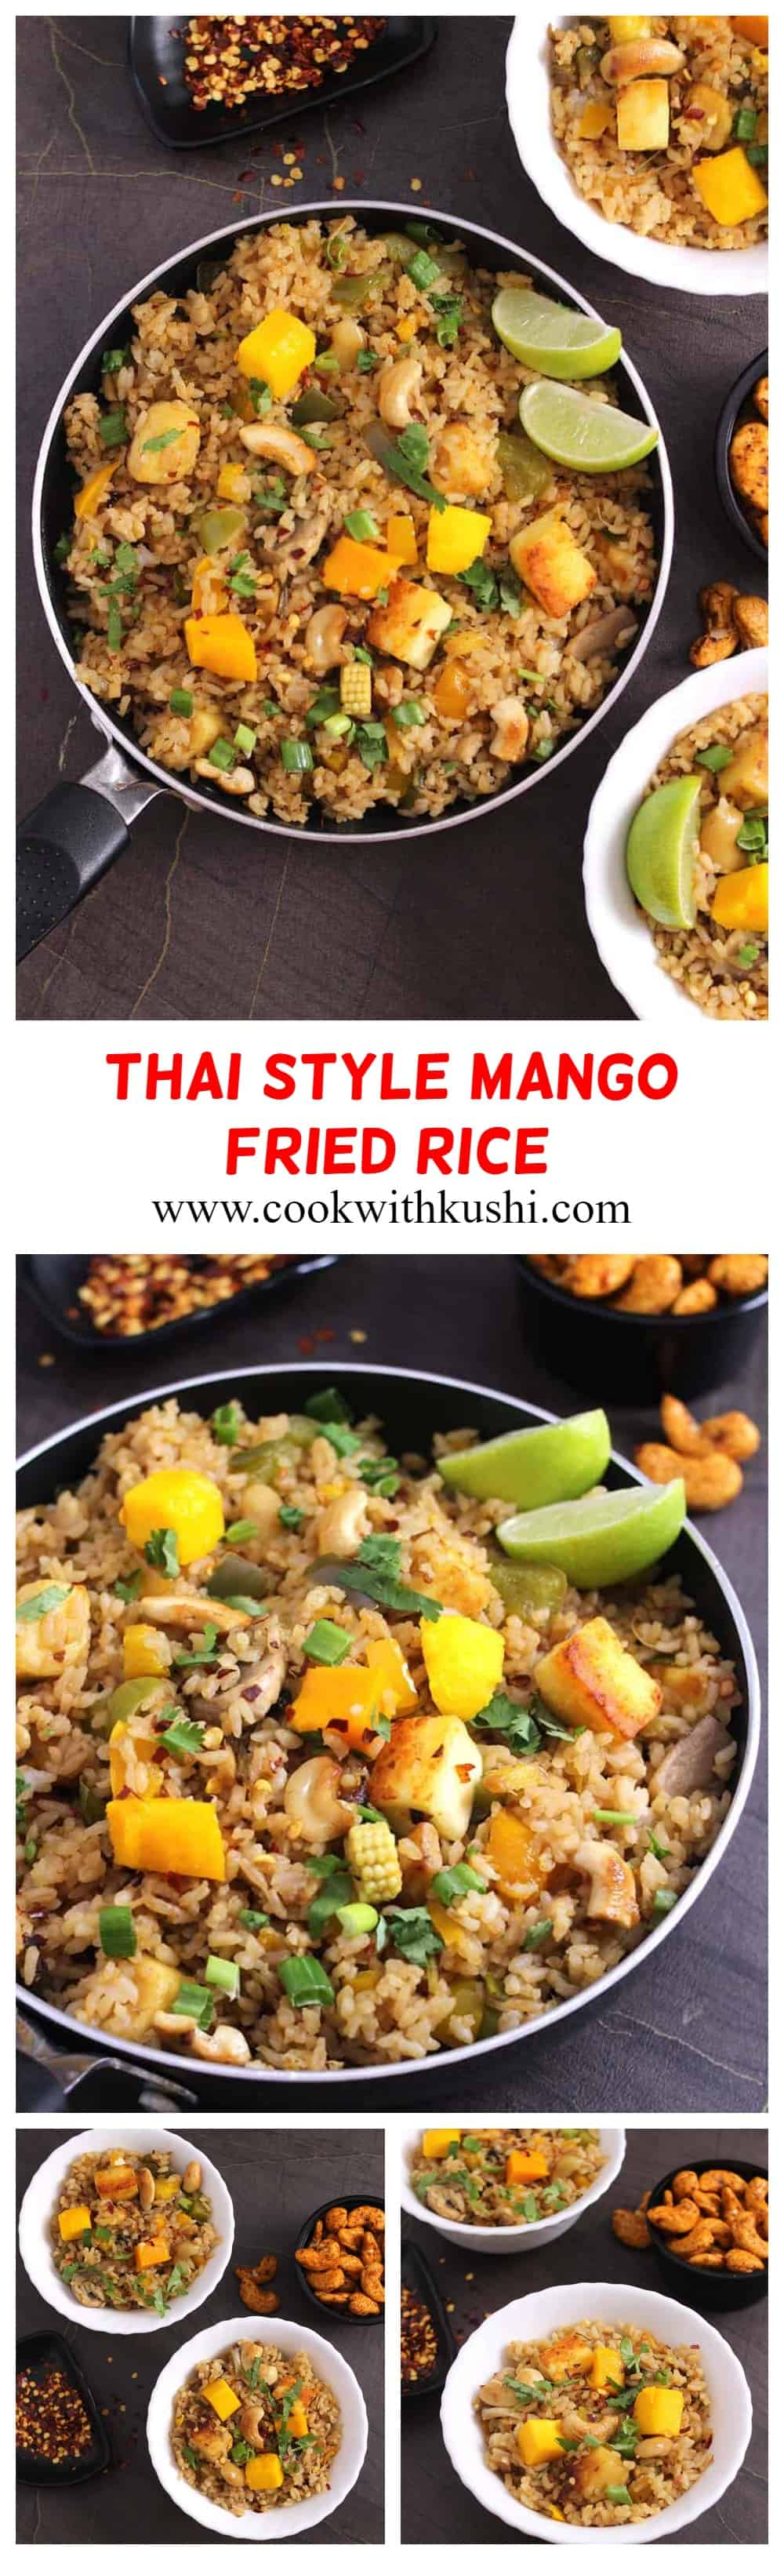 Thai Mango Fried Rice | Veg Fried Rice is a super easy to make, healthy and delicious rice recipe that can be prepared in less than 30 minutes. One of the best recipe to try for busy day, weeknight dinner or weekend lunch. #friedrice #pineapplefriedrice #thaibasil #veggiefriedrice #quickvegetarianmeals #chickenfriedrice #shrimpfriedrice #instantpotrice